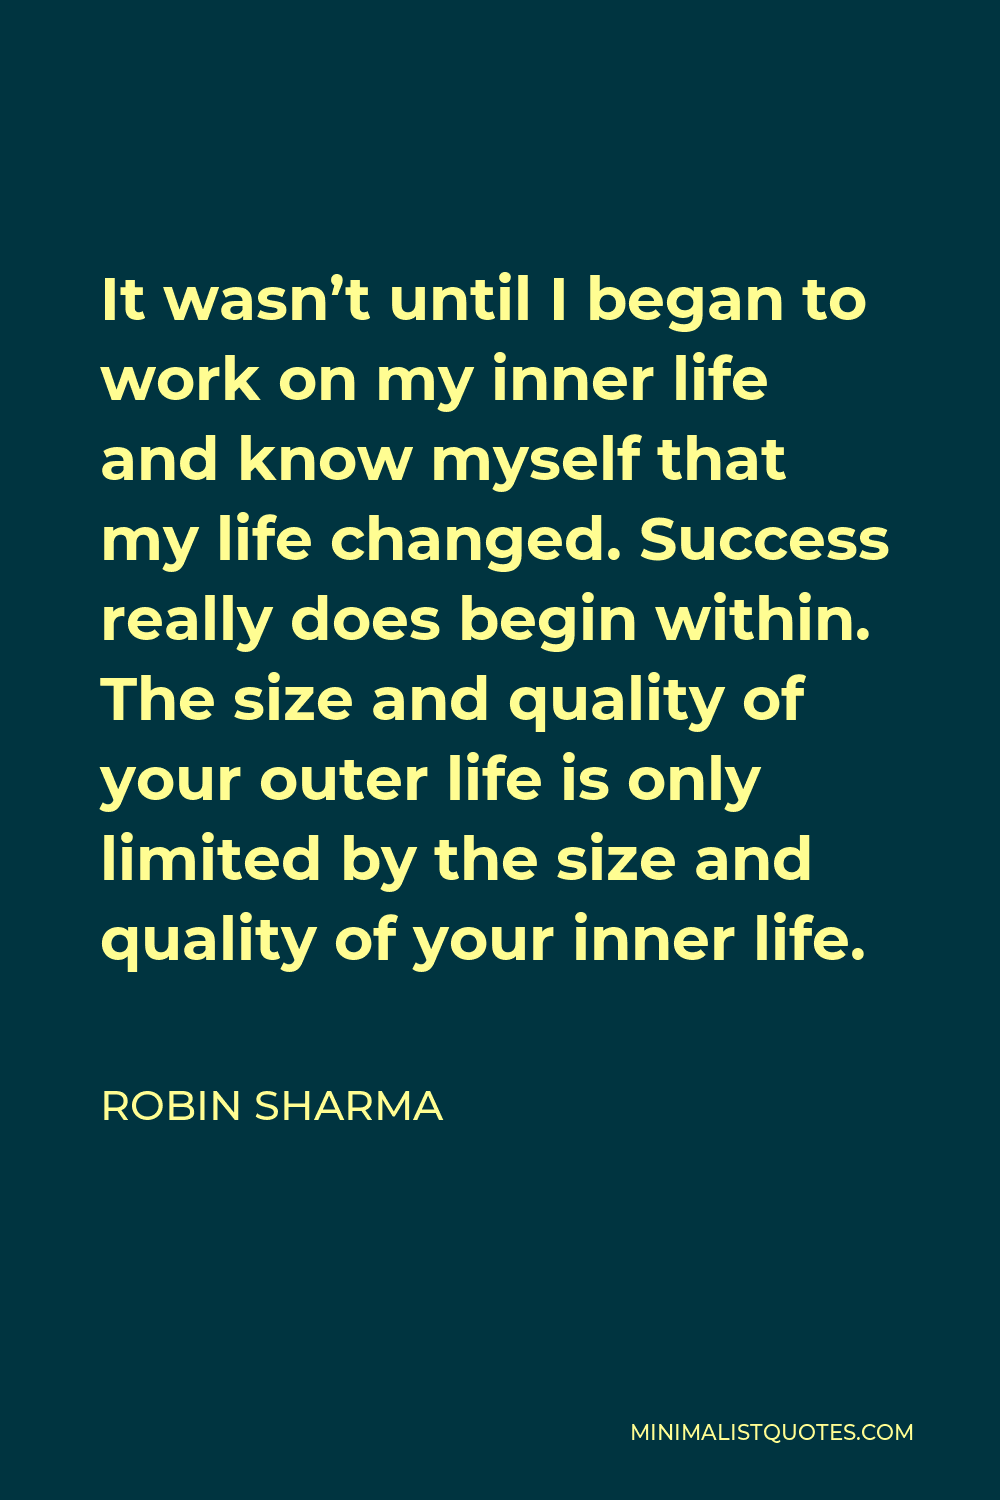 Robin Sharma Quote - It wasn’t until I began to work on my inner life and know myself that my life changed. Success really does begin within. The size and quality of your outer life is only limited by the size and quality of your inner life.